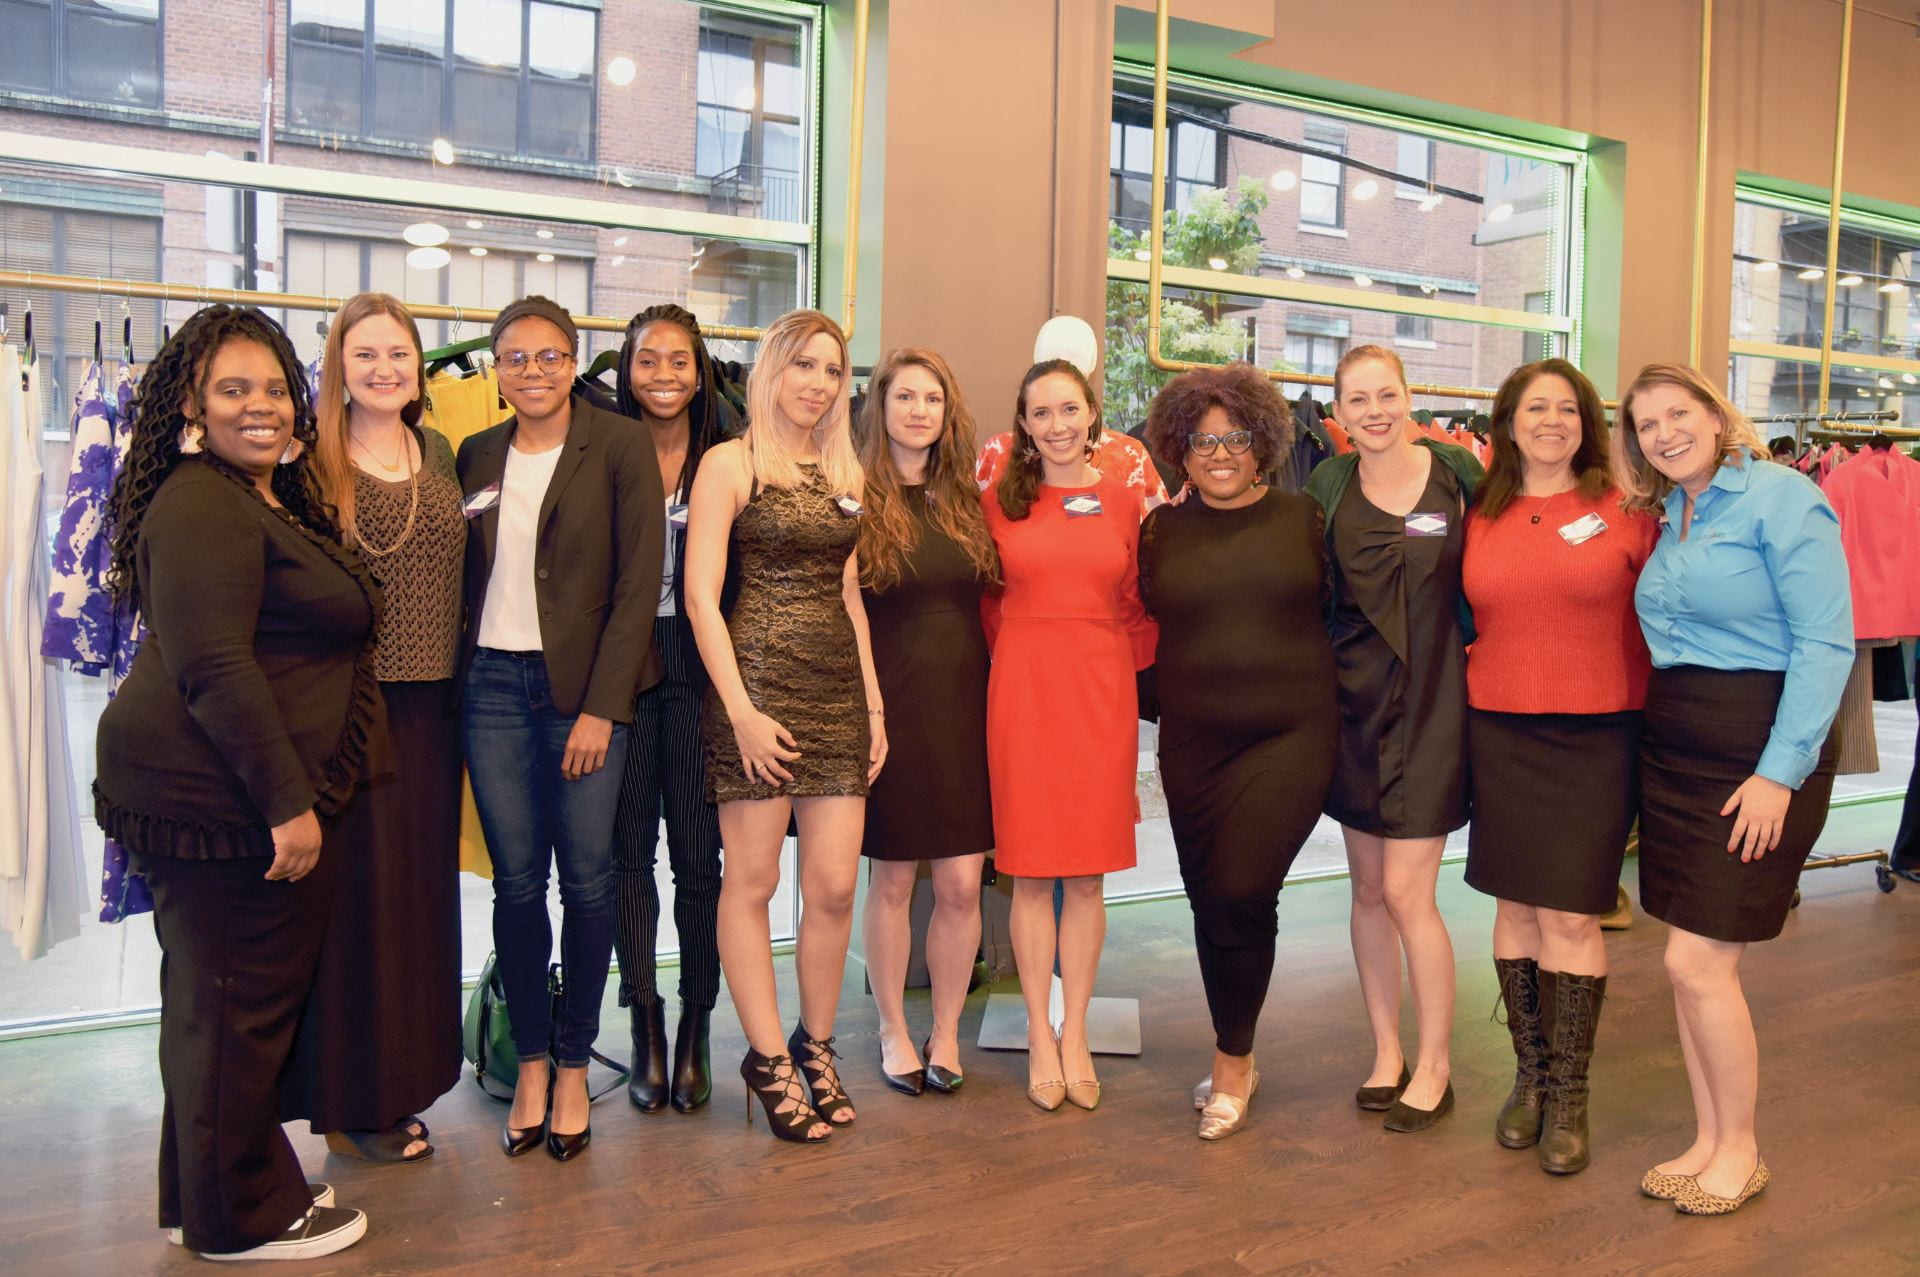 Women business founders in the first WEI accelerator cohort celebrate completing the program (left to right): Jennifer Spraggins (MBA ’18), Melissa Ames, DePaul student Parker English, Margaret Bamgbose, Soumaya Yacoub, WEI director Abigail Ingram (LAS MA ’15, JD ’18), Elise Gelwicks, Nika Vaughn, Elizabeth Ames-Wollek (MBA ’15), Nora Wall and Michelle Frame. Not pictured: Ariana Lee (BA ’19)